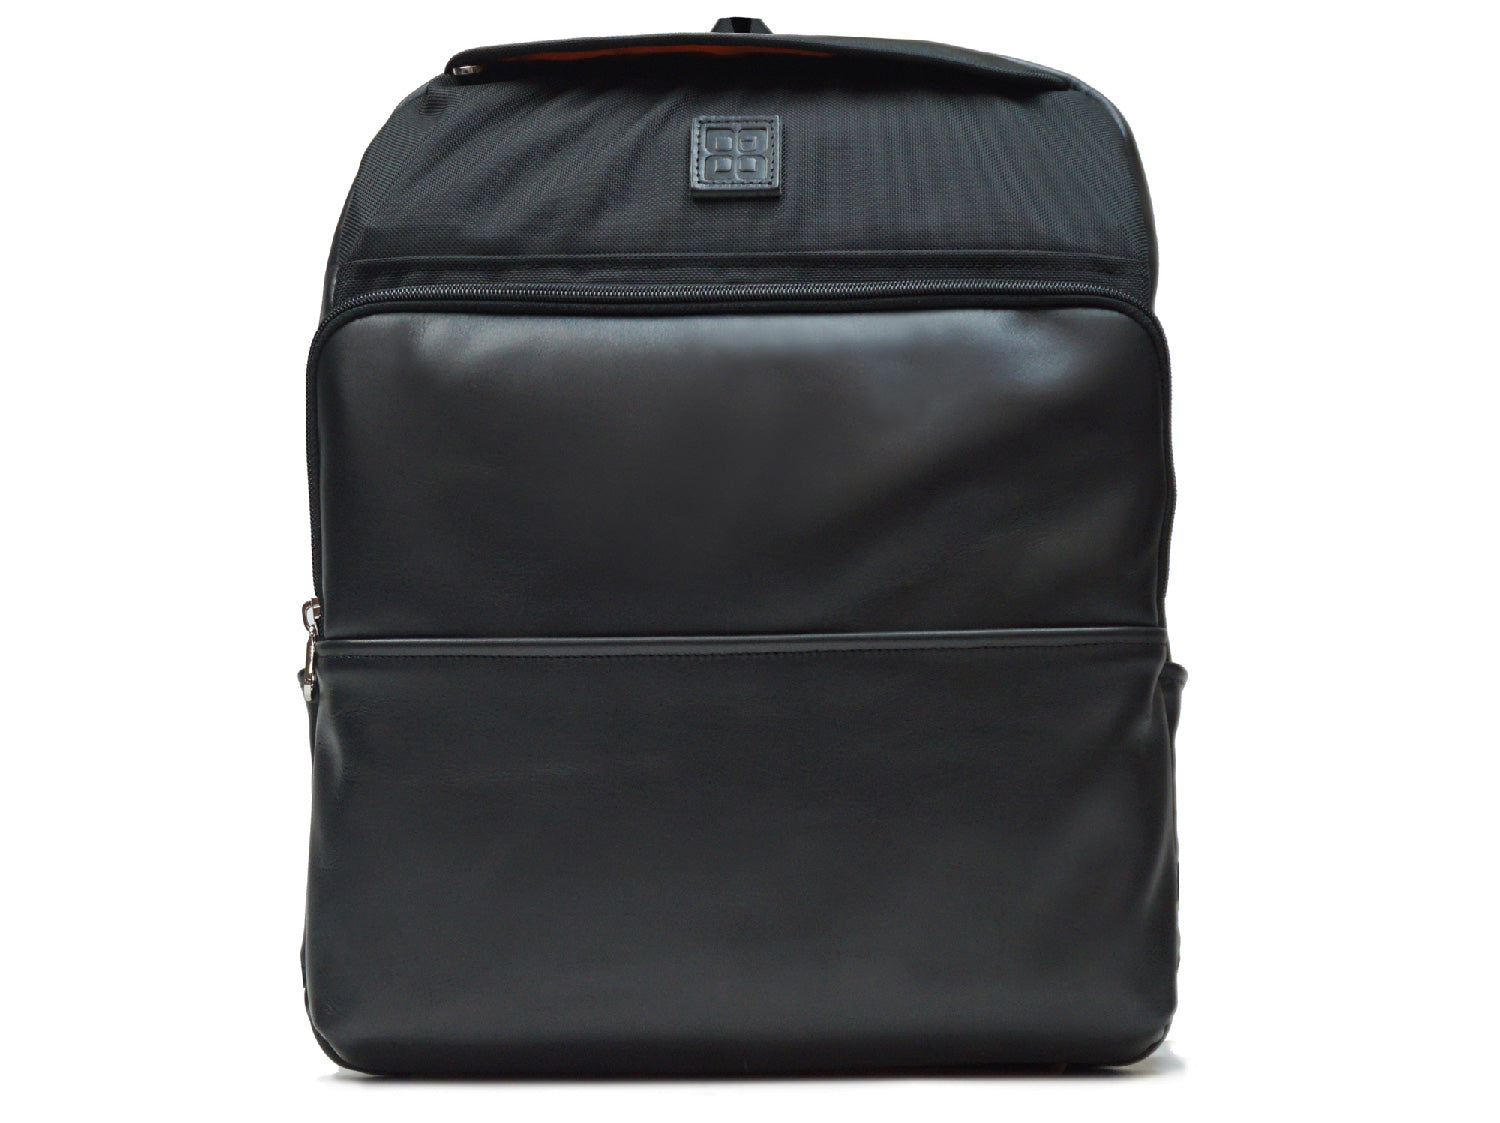 Leather Rhodes Laptop Backpack. Made in The USA - Tucker-Bloom